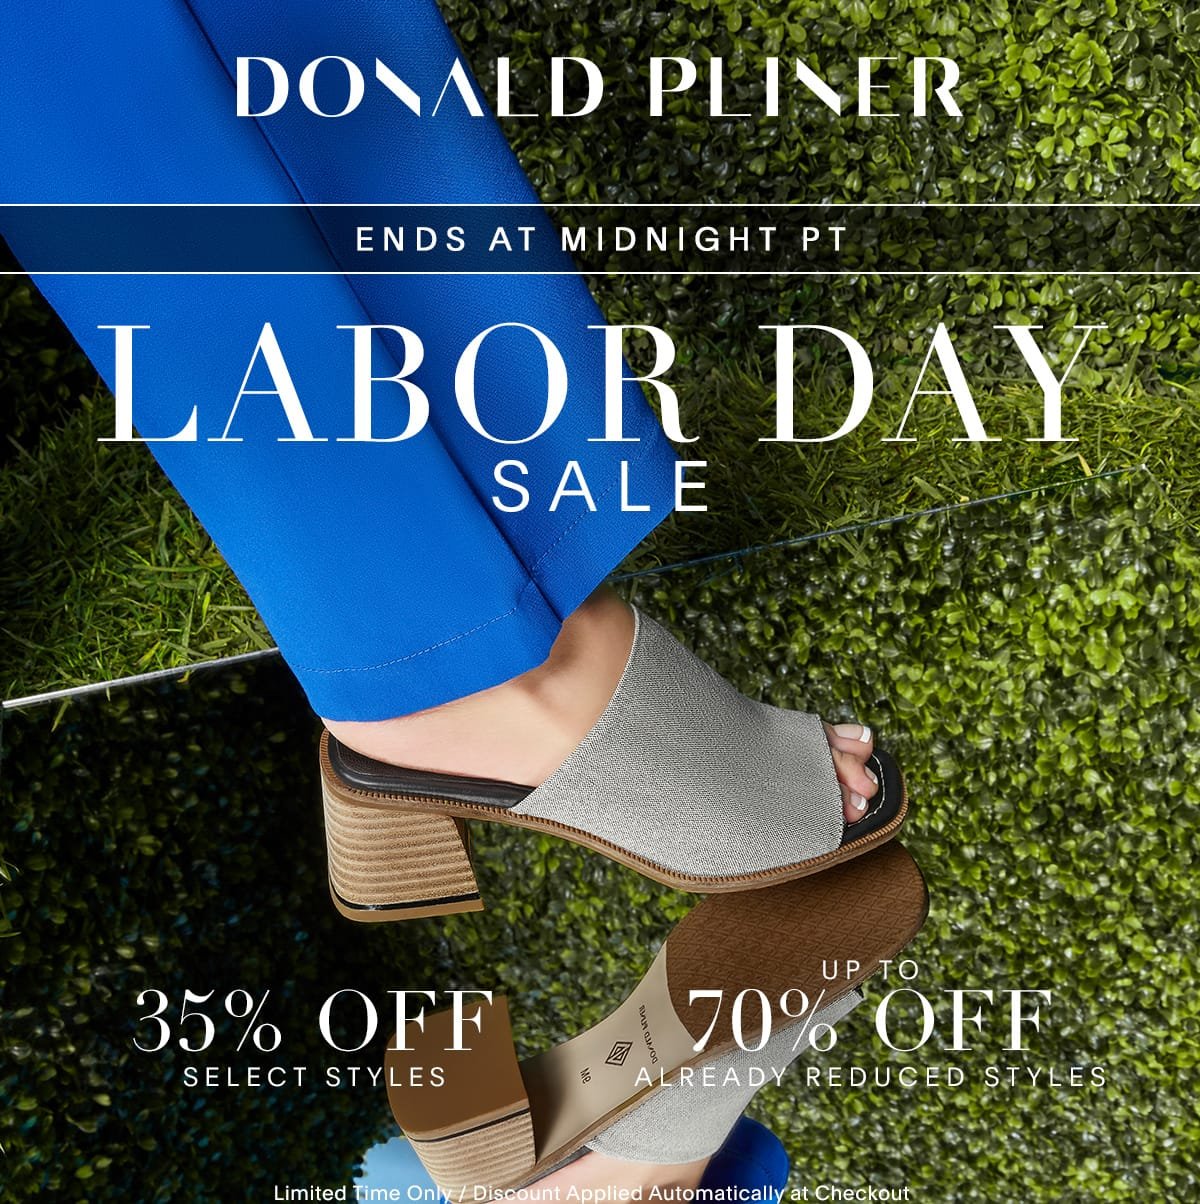 Donald Pliner. Ends at midnight PT. Labor Day Sale. 35% OFF Select Styles. Up to 70% Off Already Reduced Styles. Limited Time Only / Discount Applied Automatically at Checkout